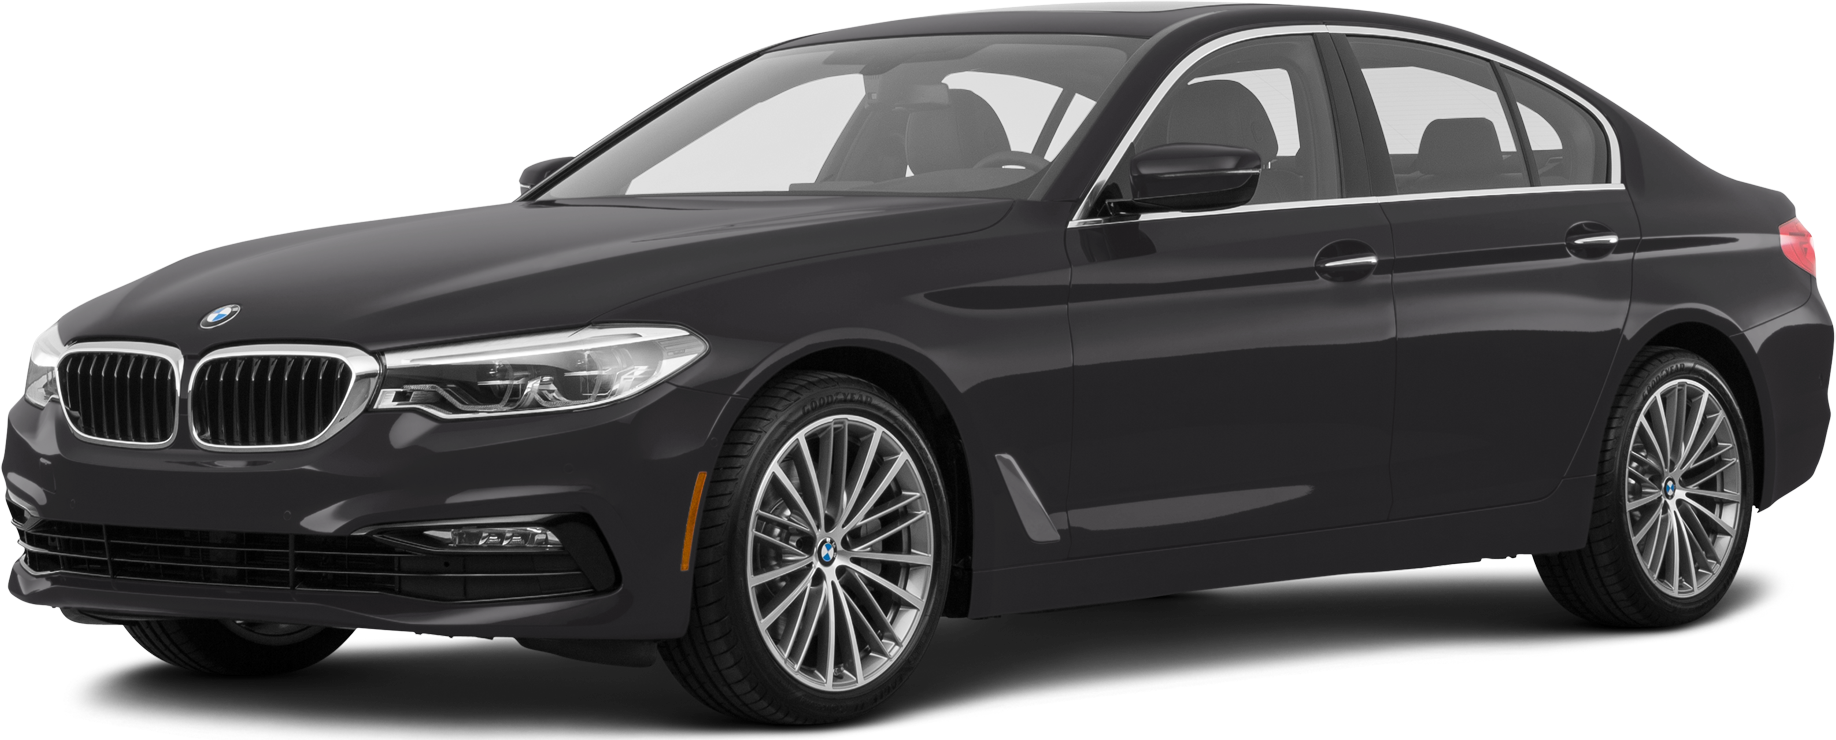 2020 BMW 5 Series Values & Cars for Sale | Kelley Blue Book